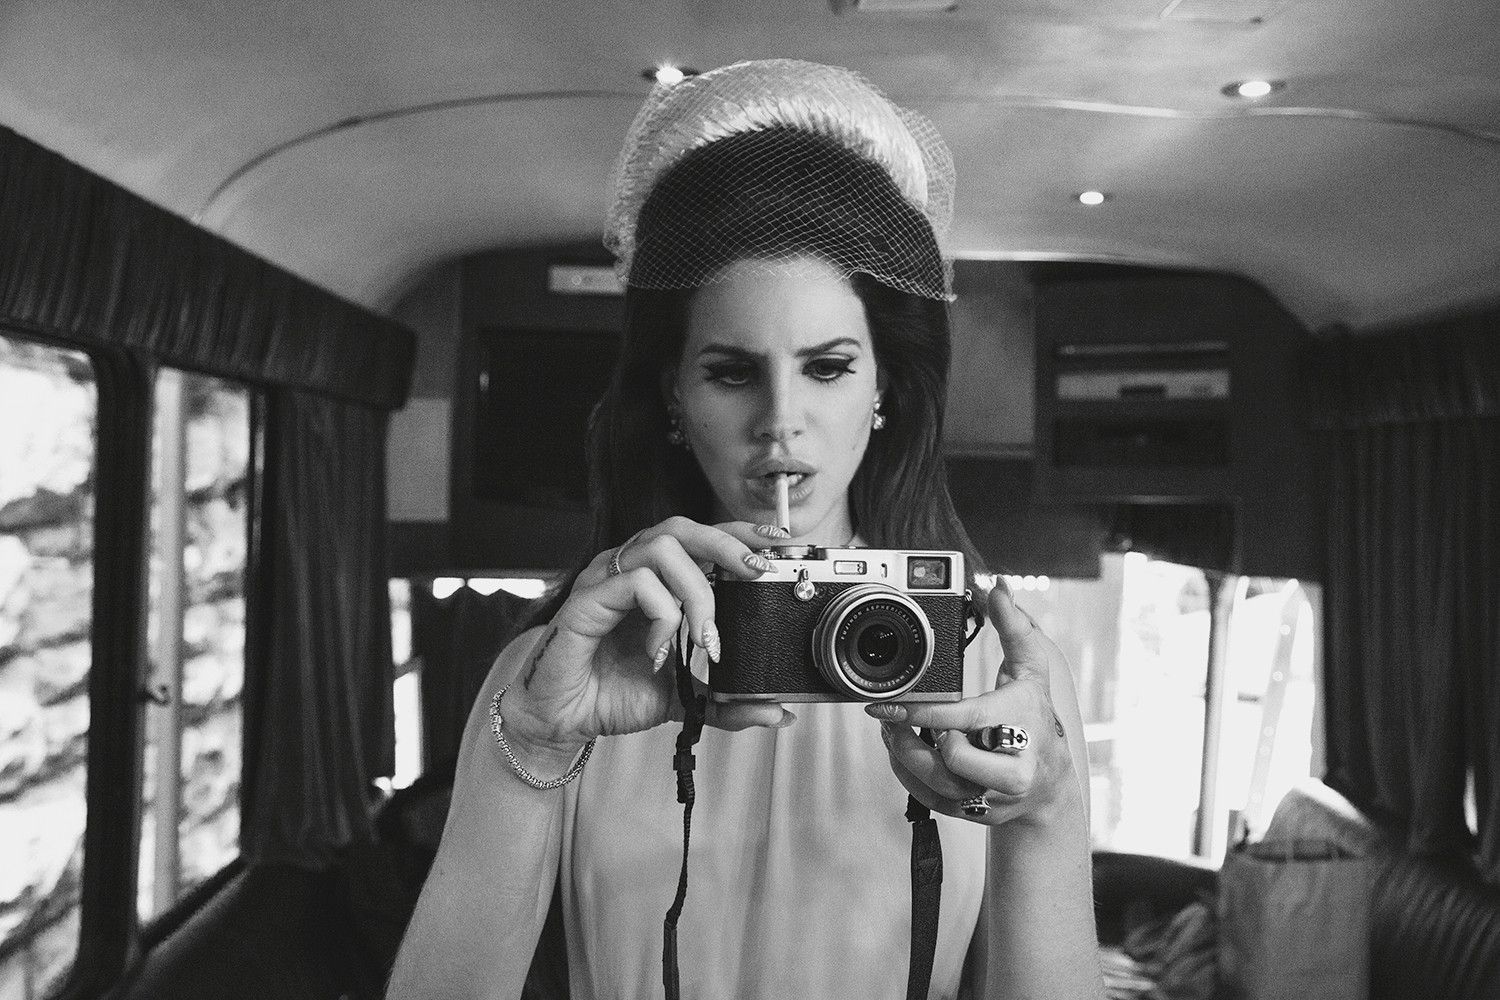 Download Lana Del Rey wallpaper for mobile phone, free Lana Del Rey HD picture